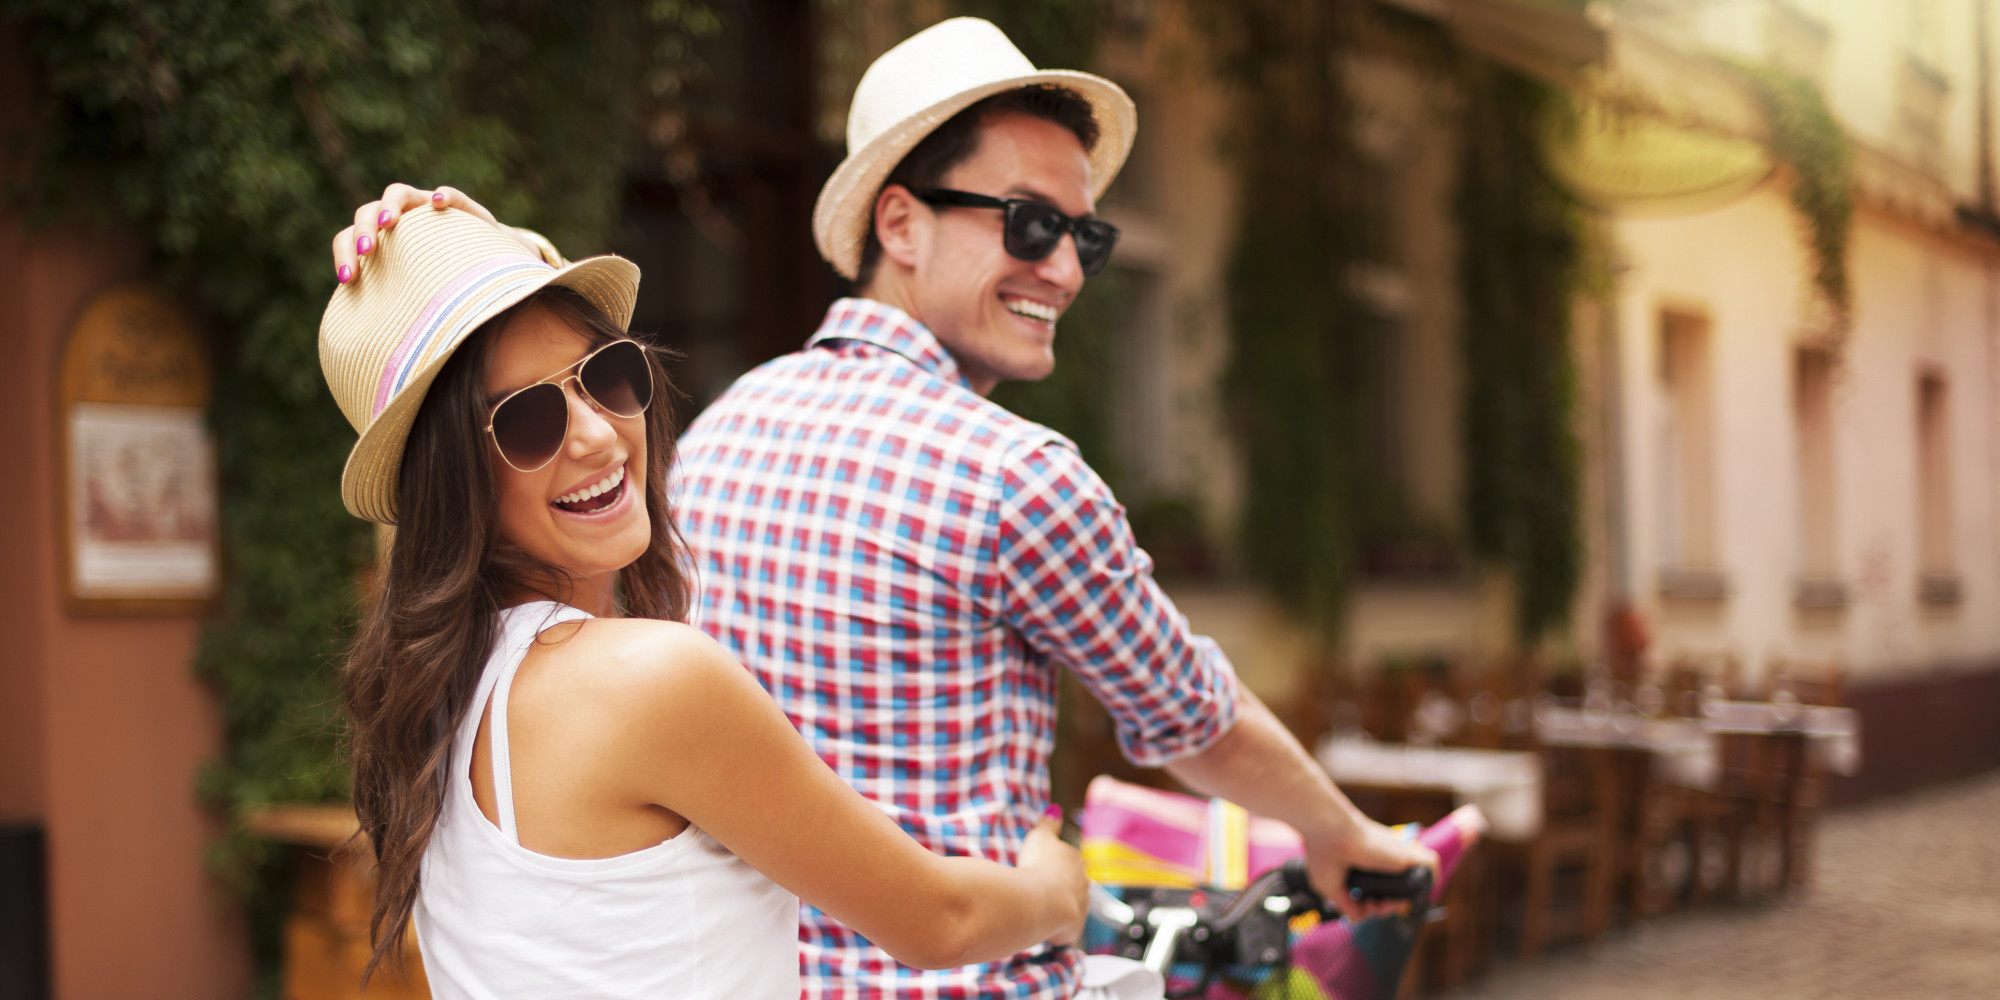 The 9 Biggest Myths About 'Happy' Couples | HuffPost